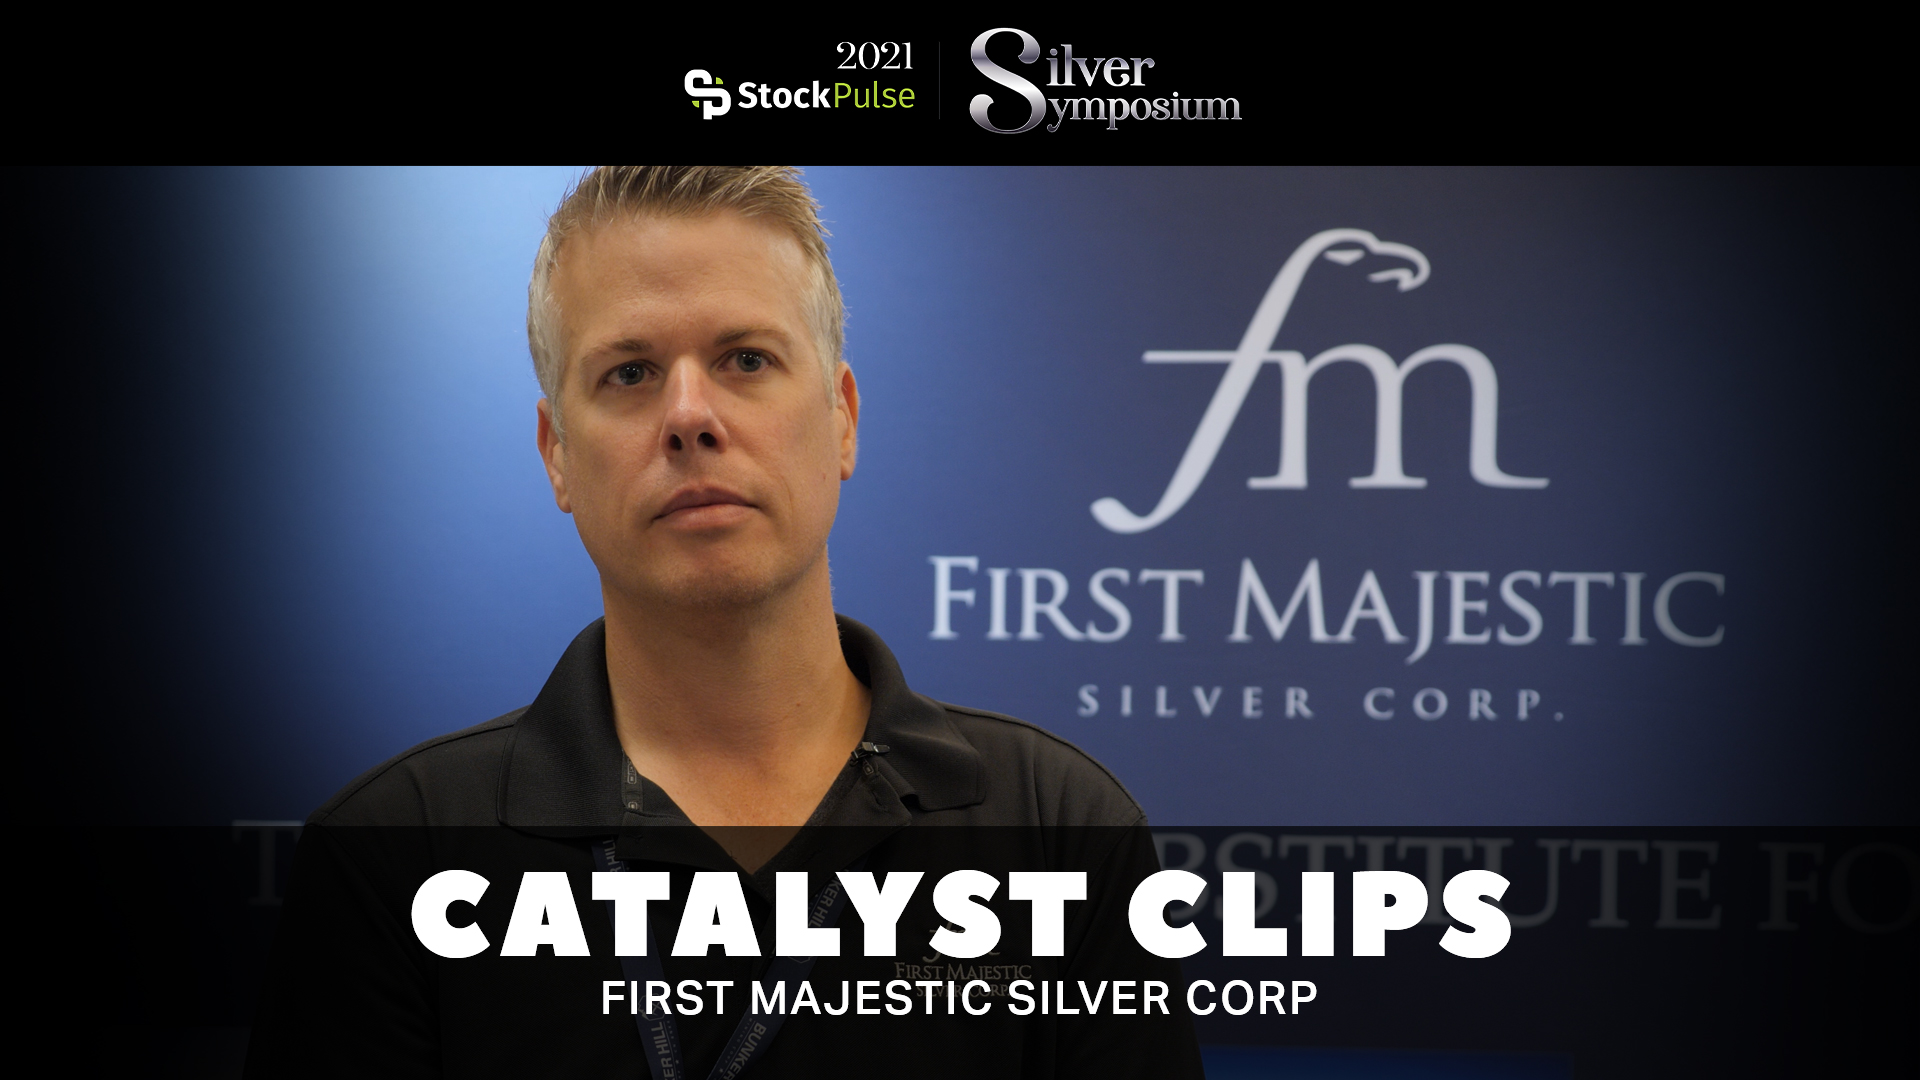 2021 StockPulse Silver Symposium Catalyst Clips | Todd Anthony of First Majestic Silver Corp